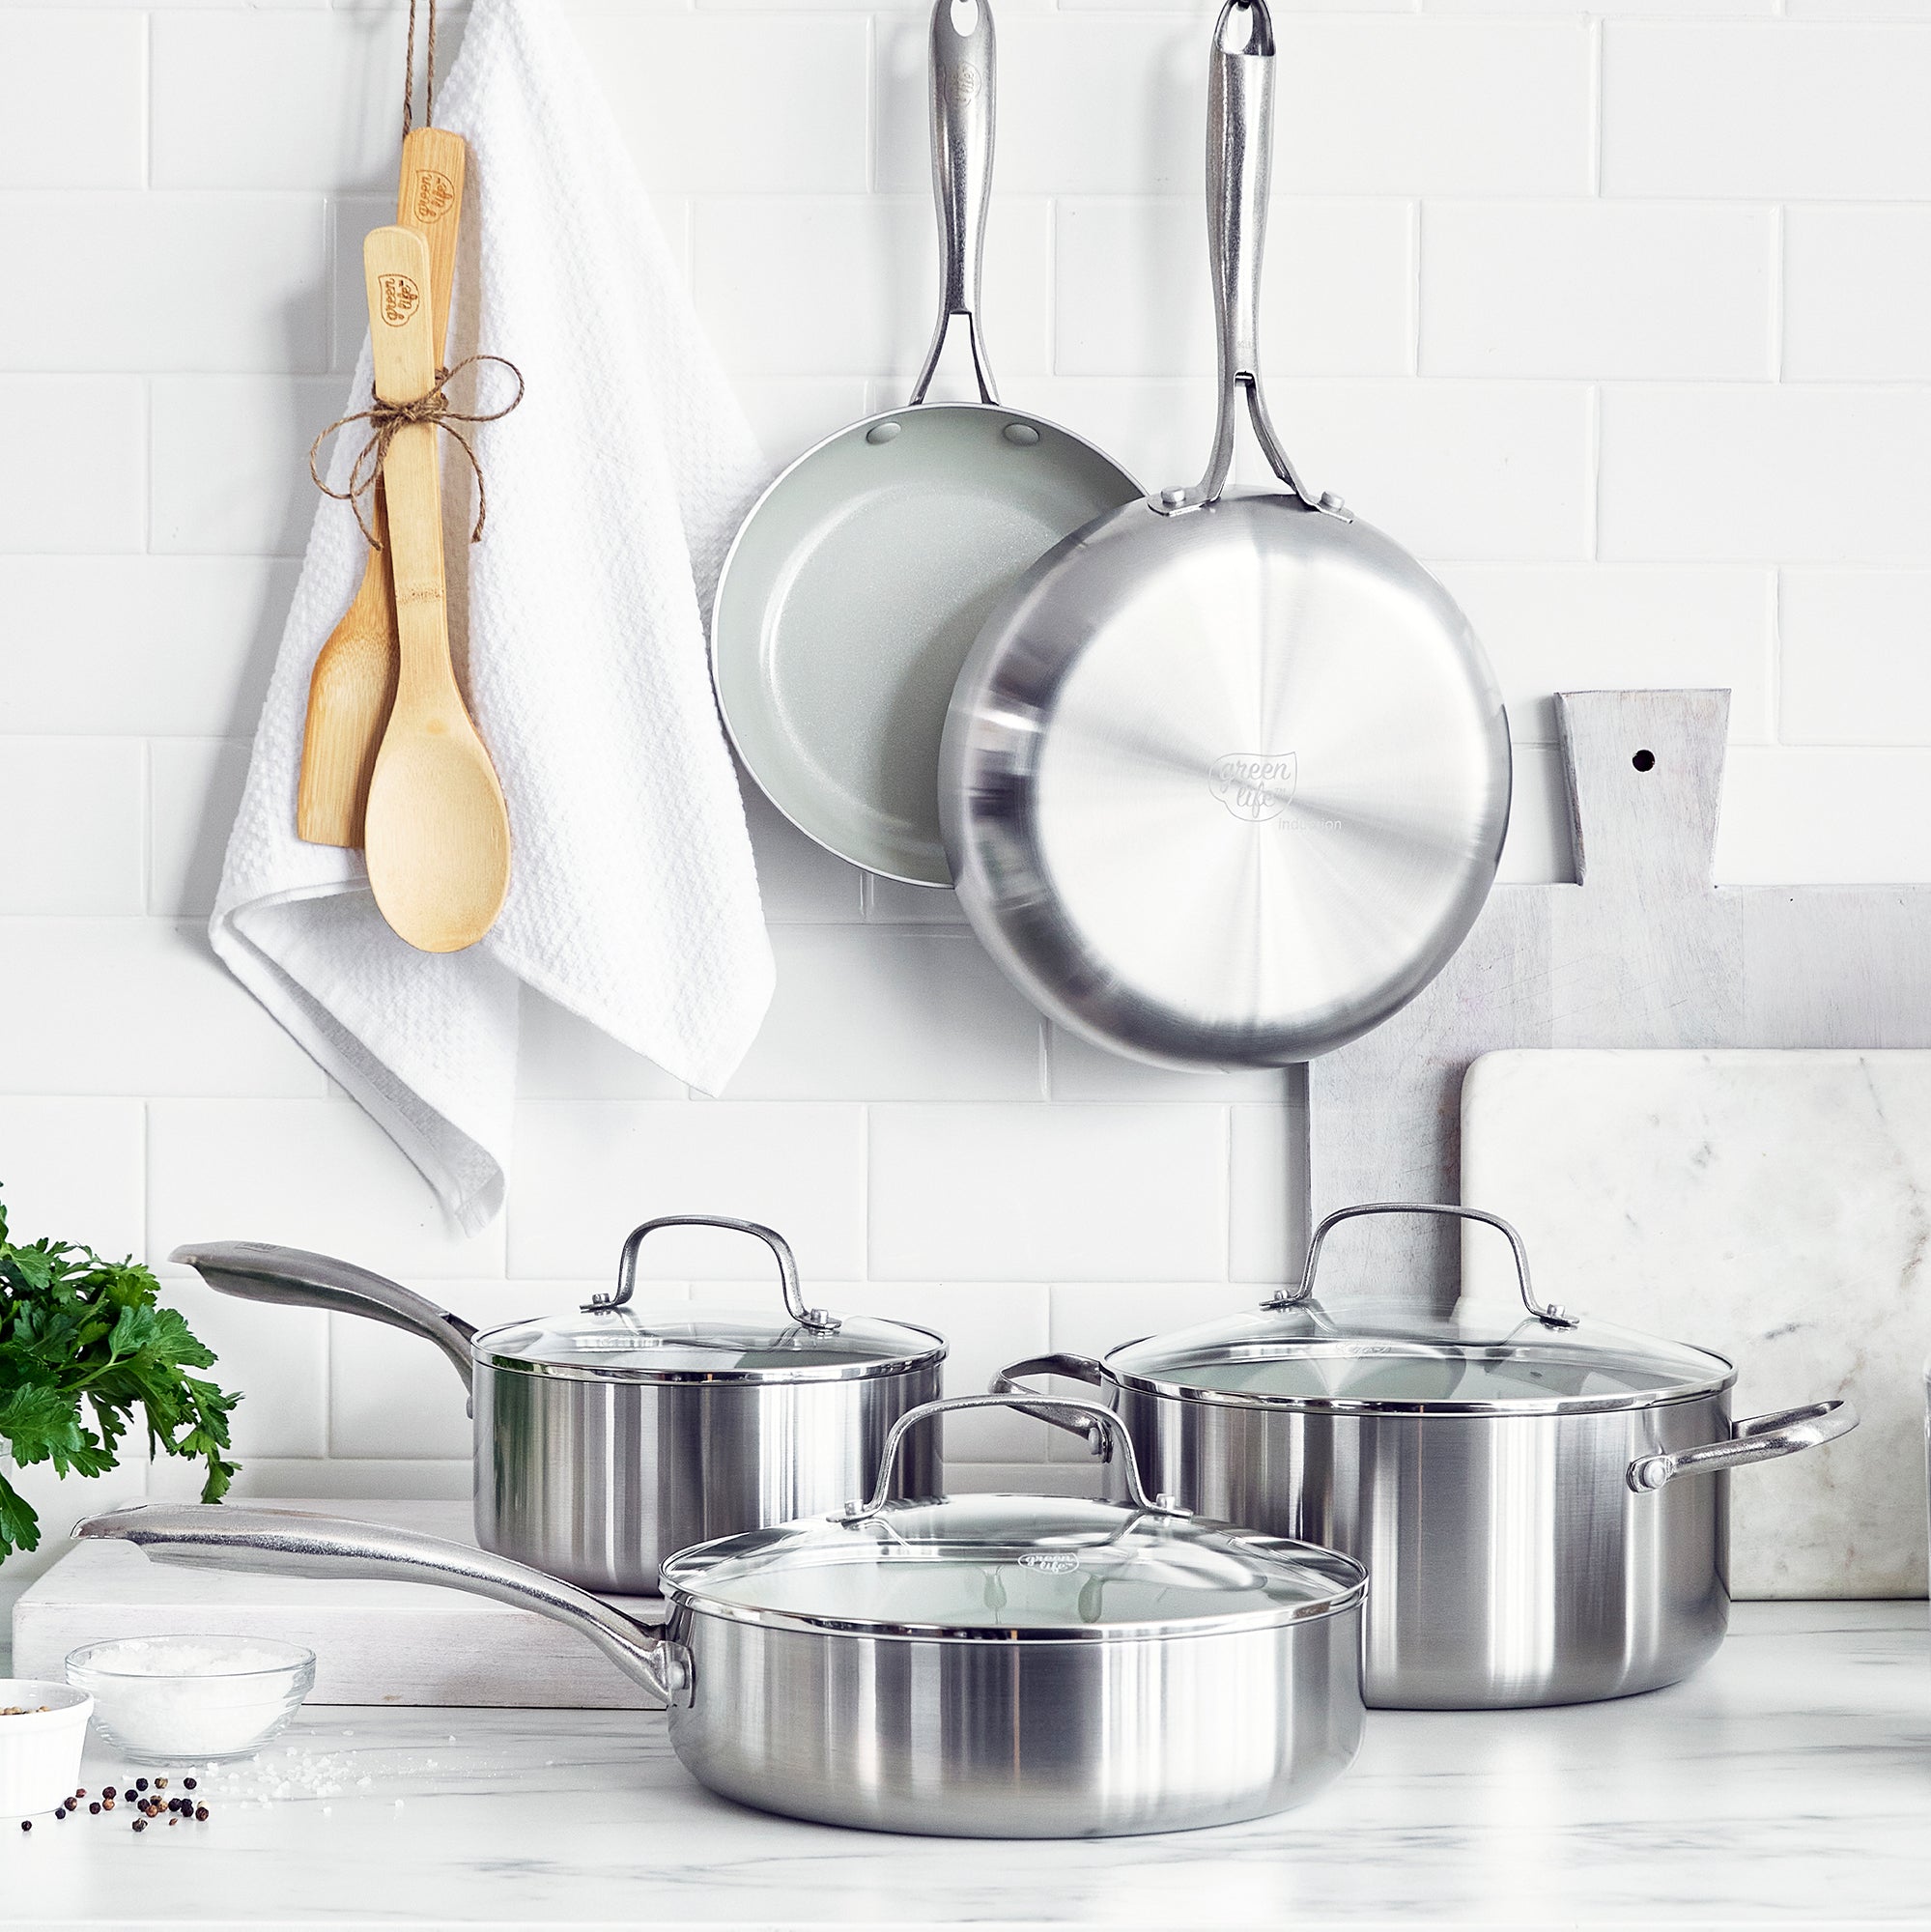 Greenlife Cookware - CEO - Greenlife Cookware